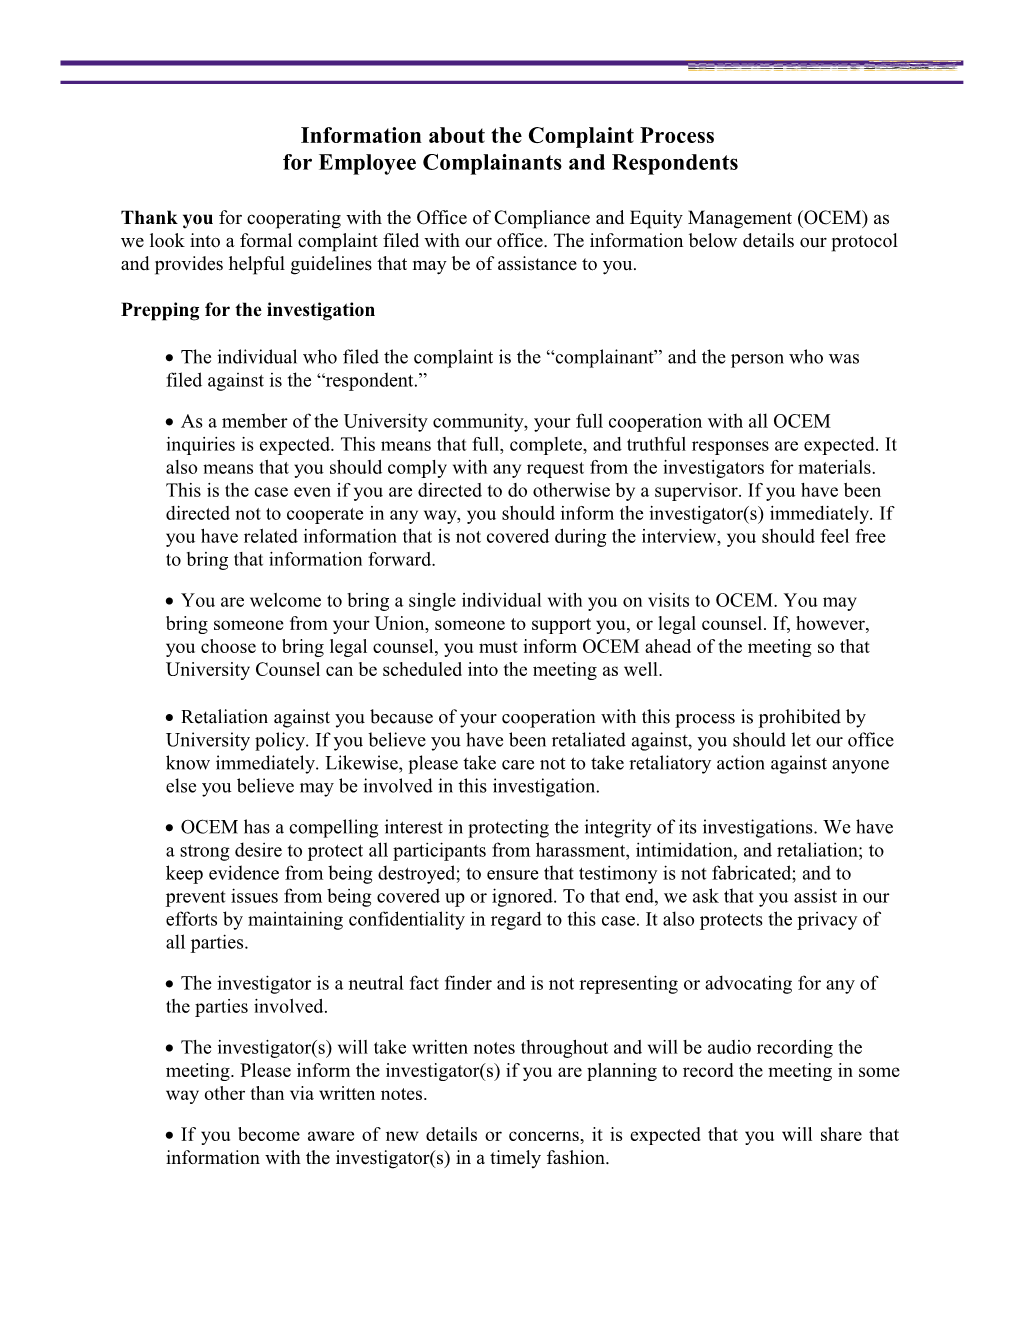 Information About the Complaint Process for Employee Complainants and Respondents